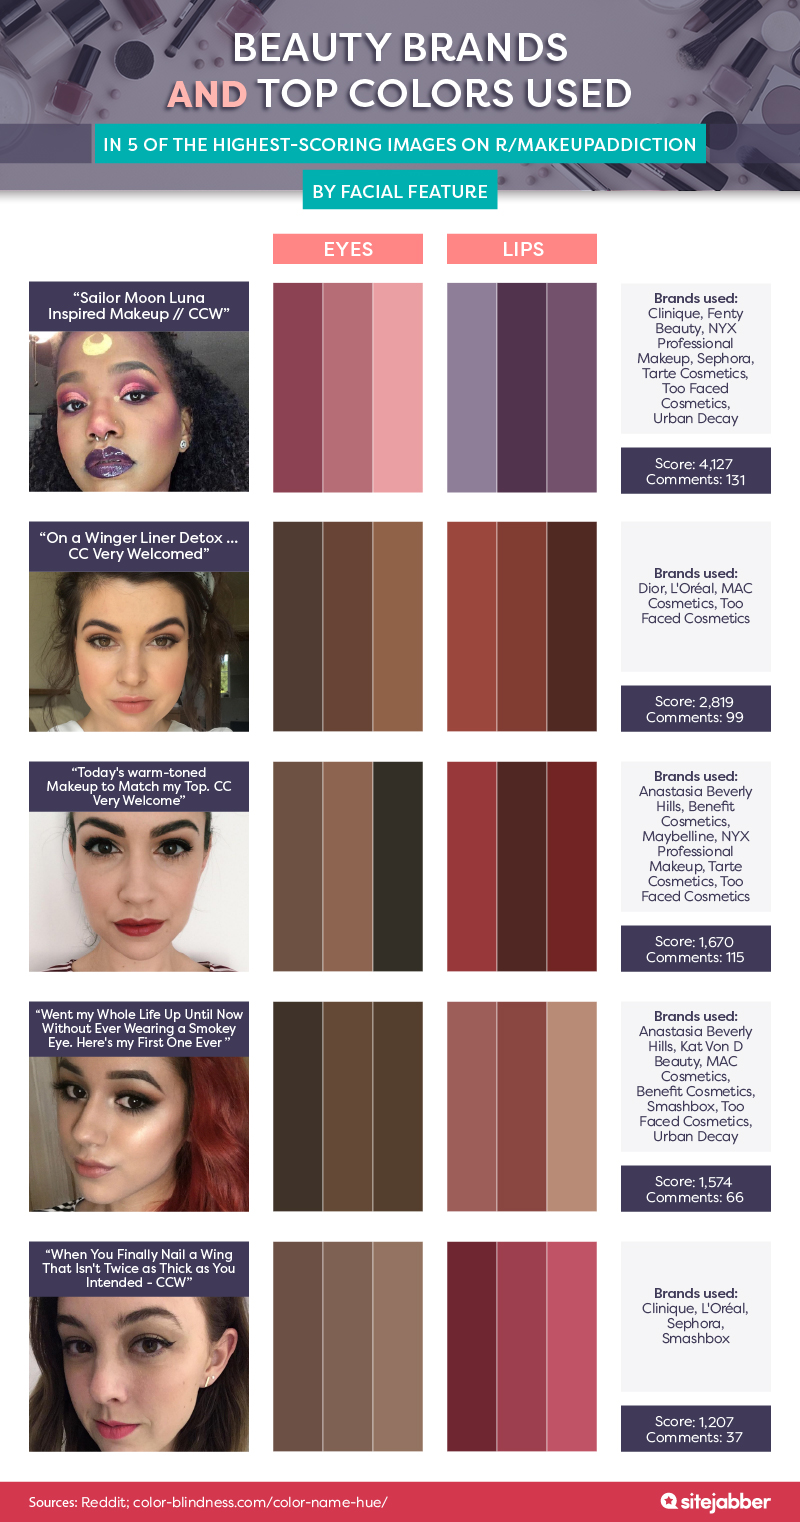 Beauty brands and top colors used in 5 of the highest-scoring images on r/makeupaddiction, by facial feature